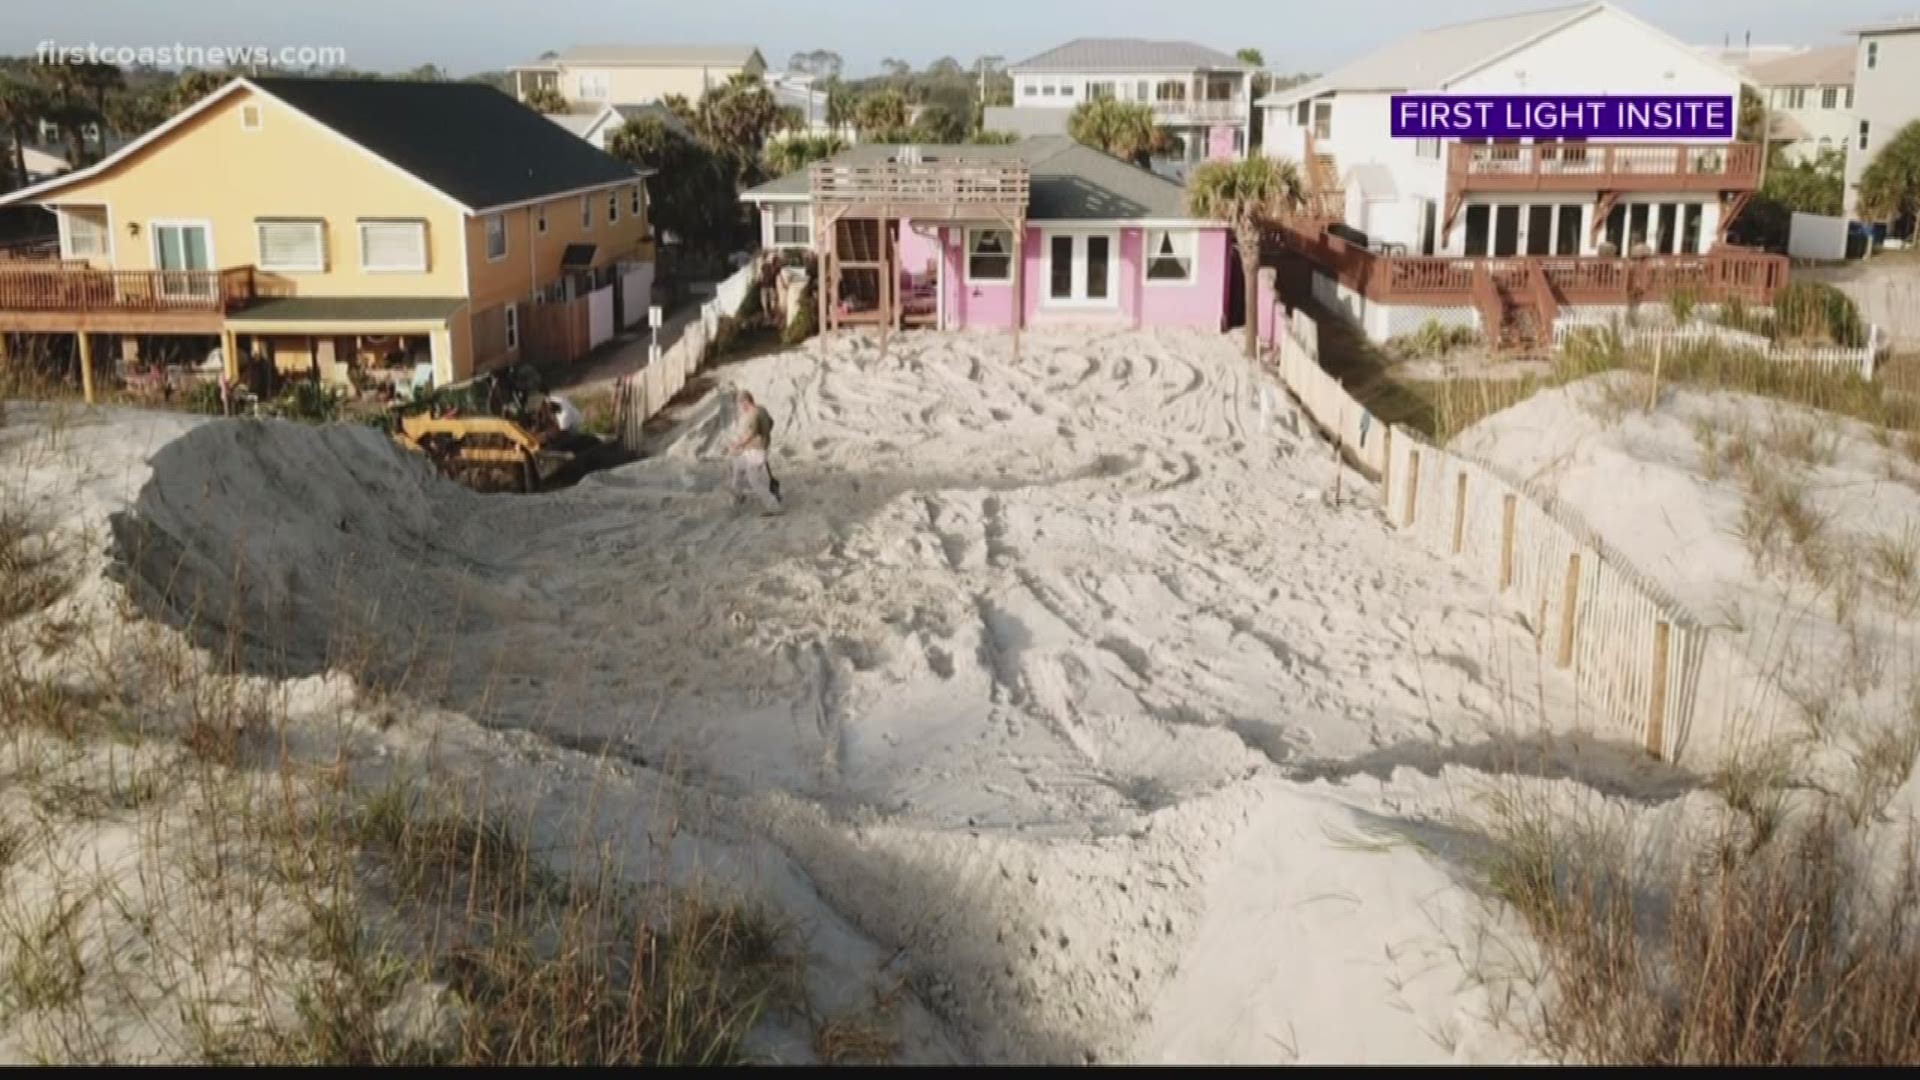 State permit shows DEP gave the homeowners permission to excavate 6 feet of dune in order to cope with "windblown material."